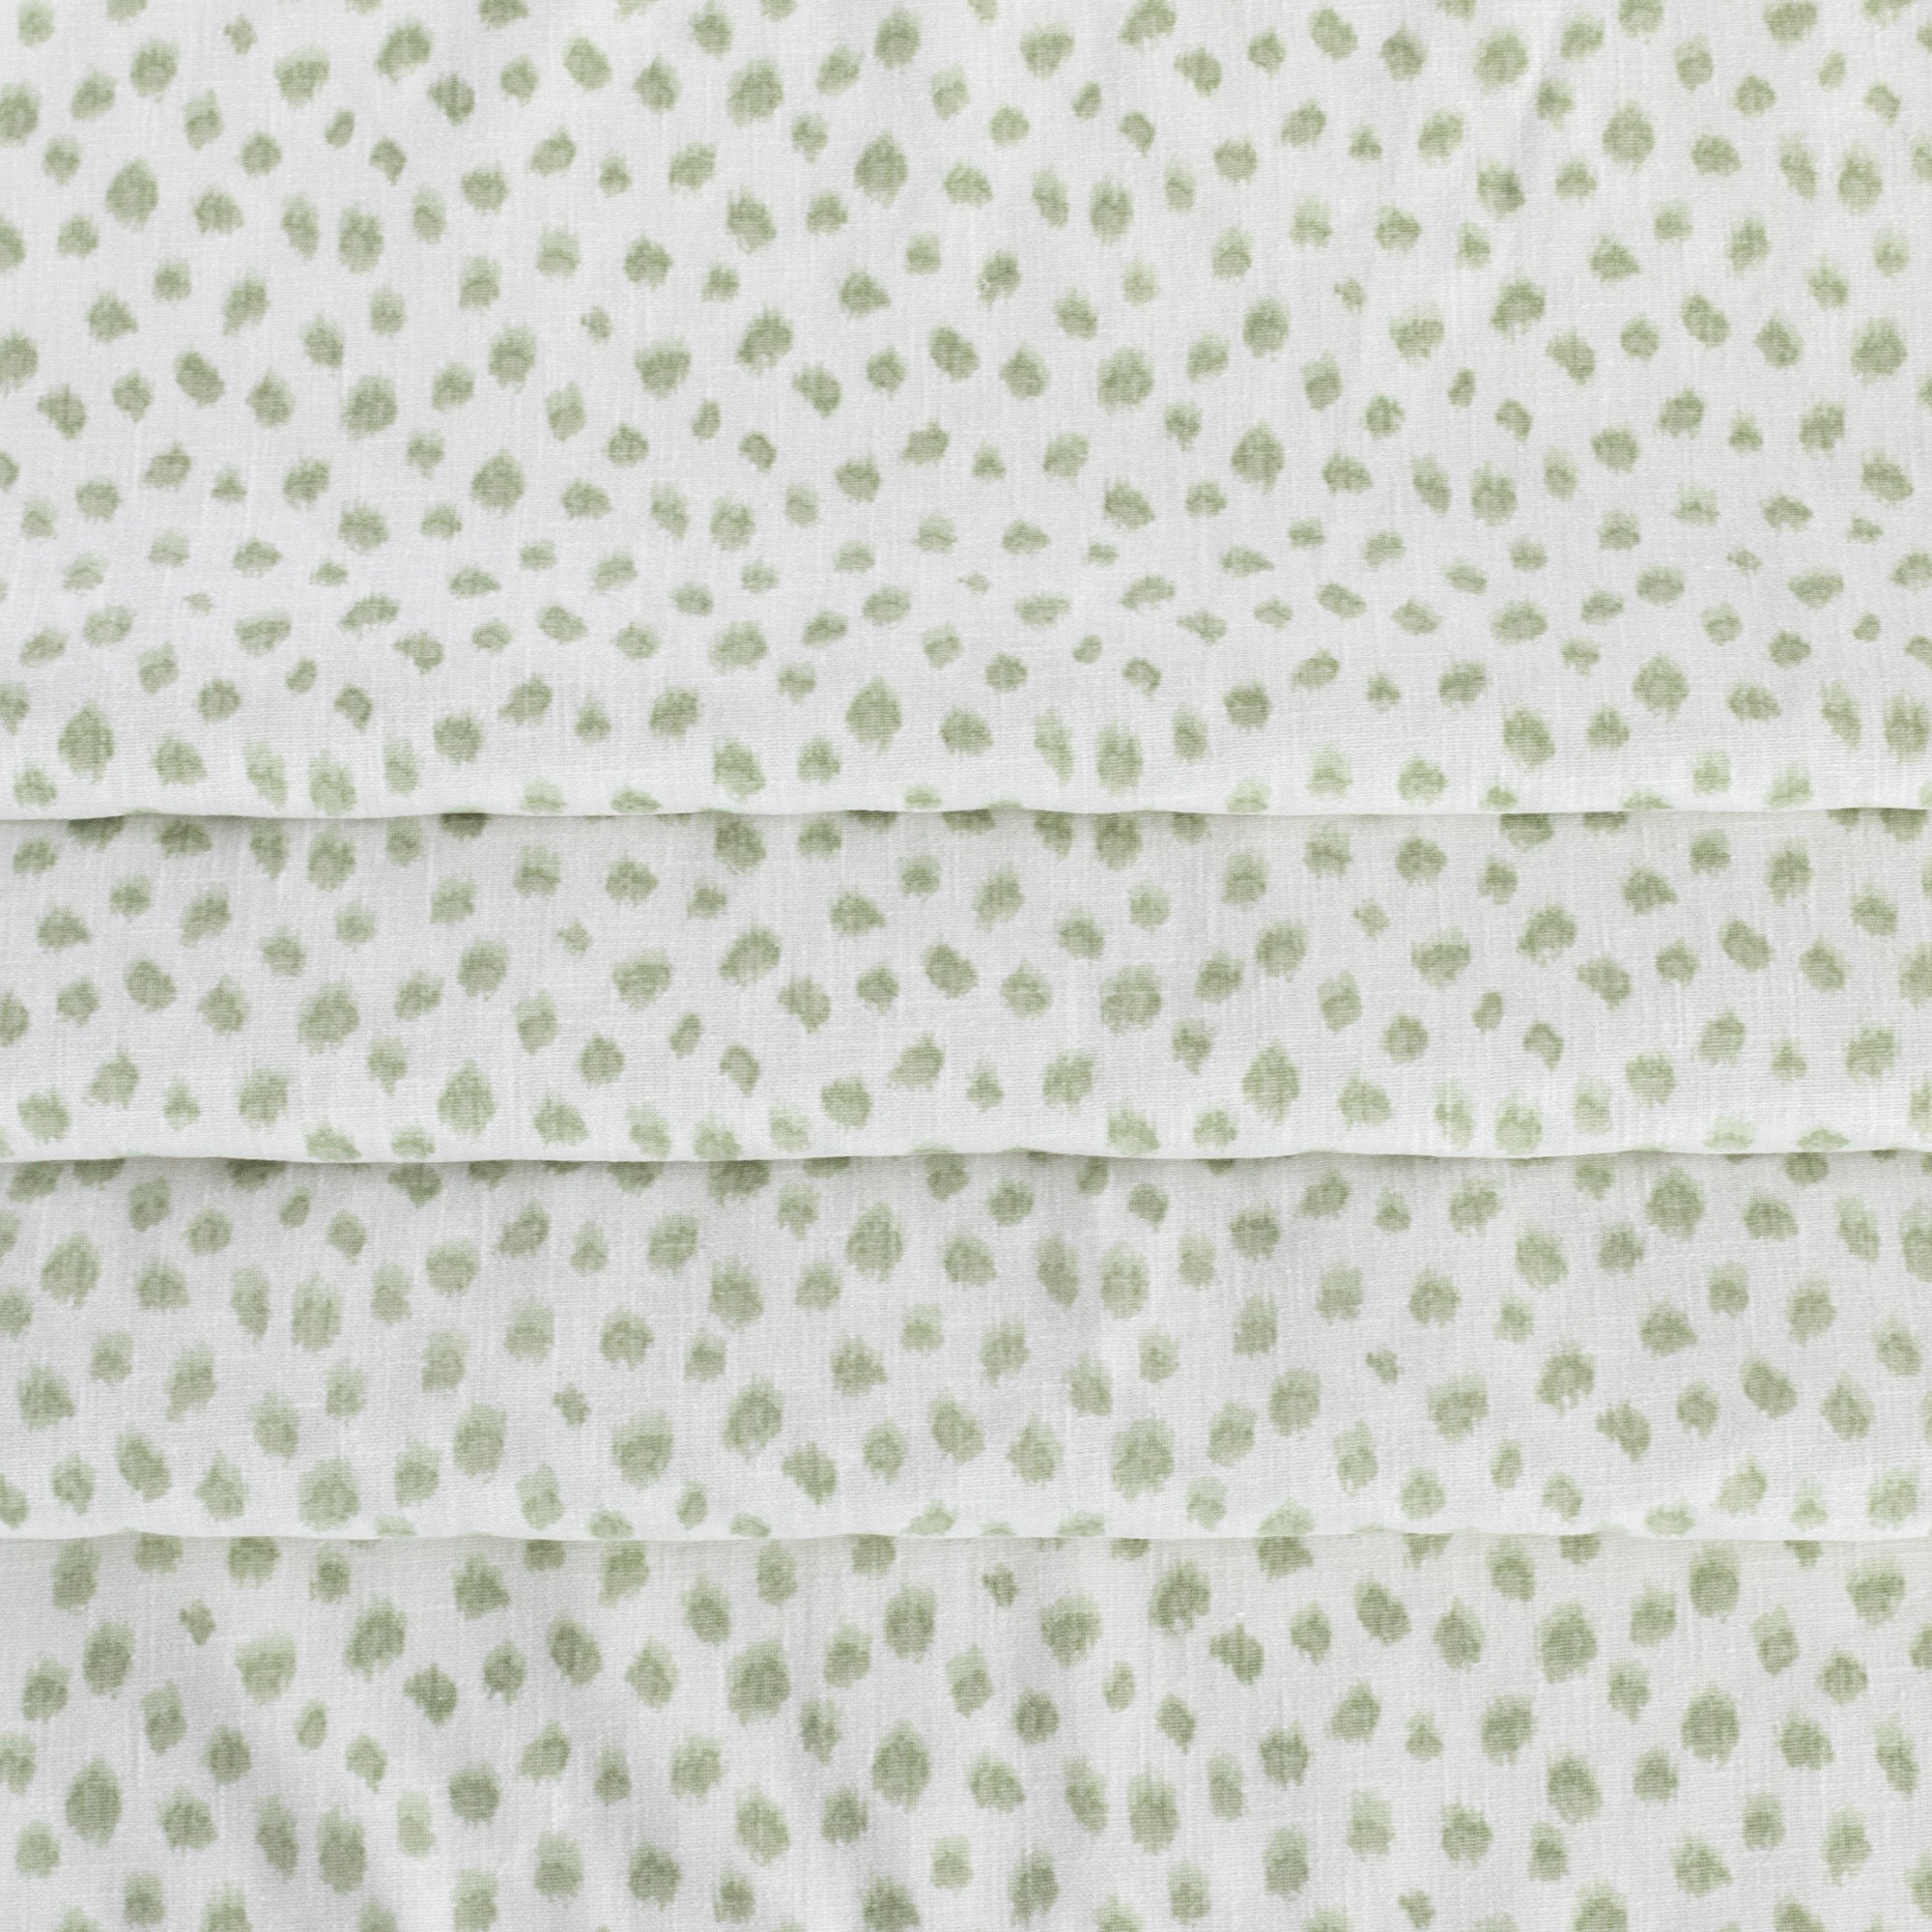 a white and green inky dot print home decor fabric